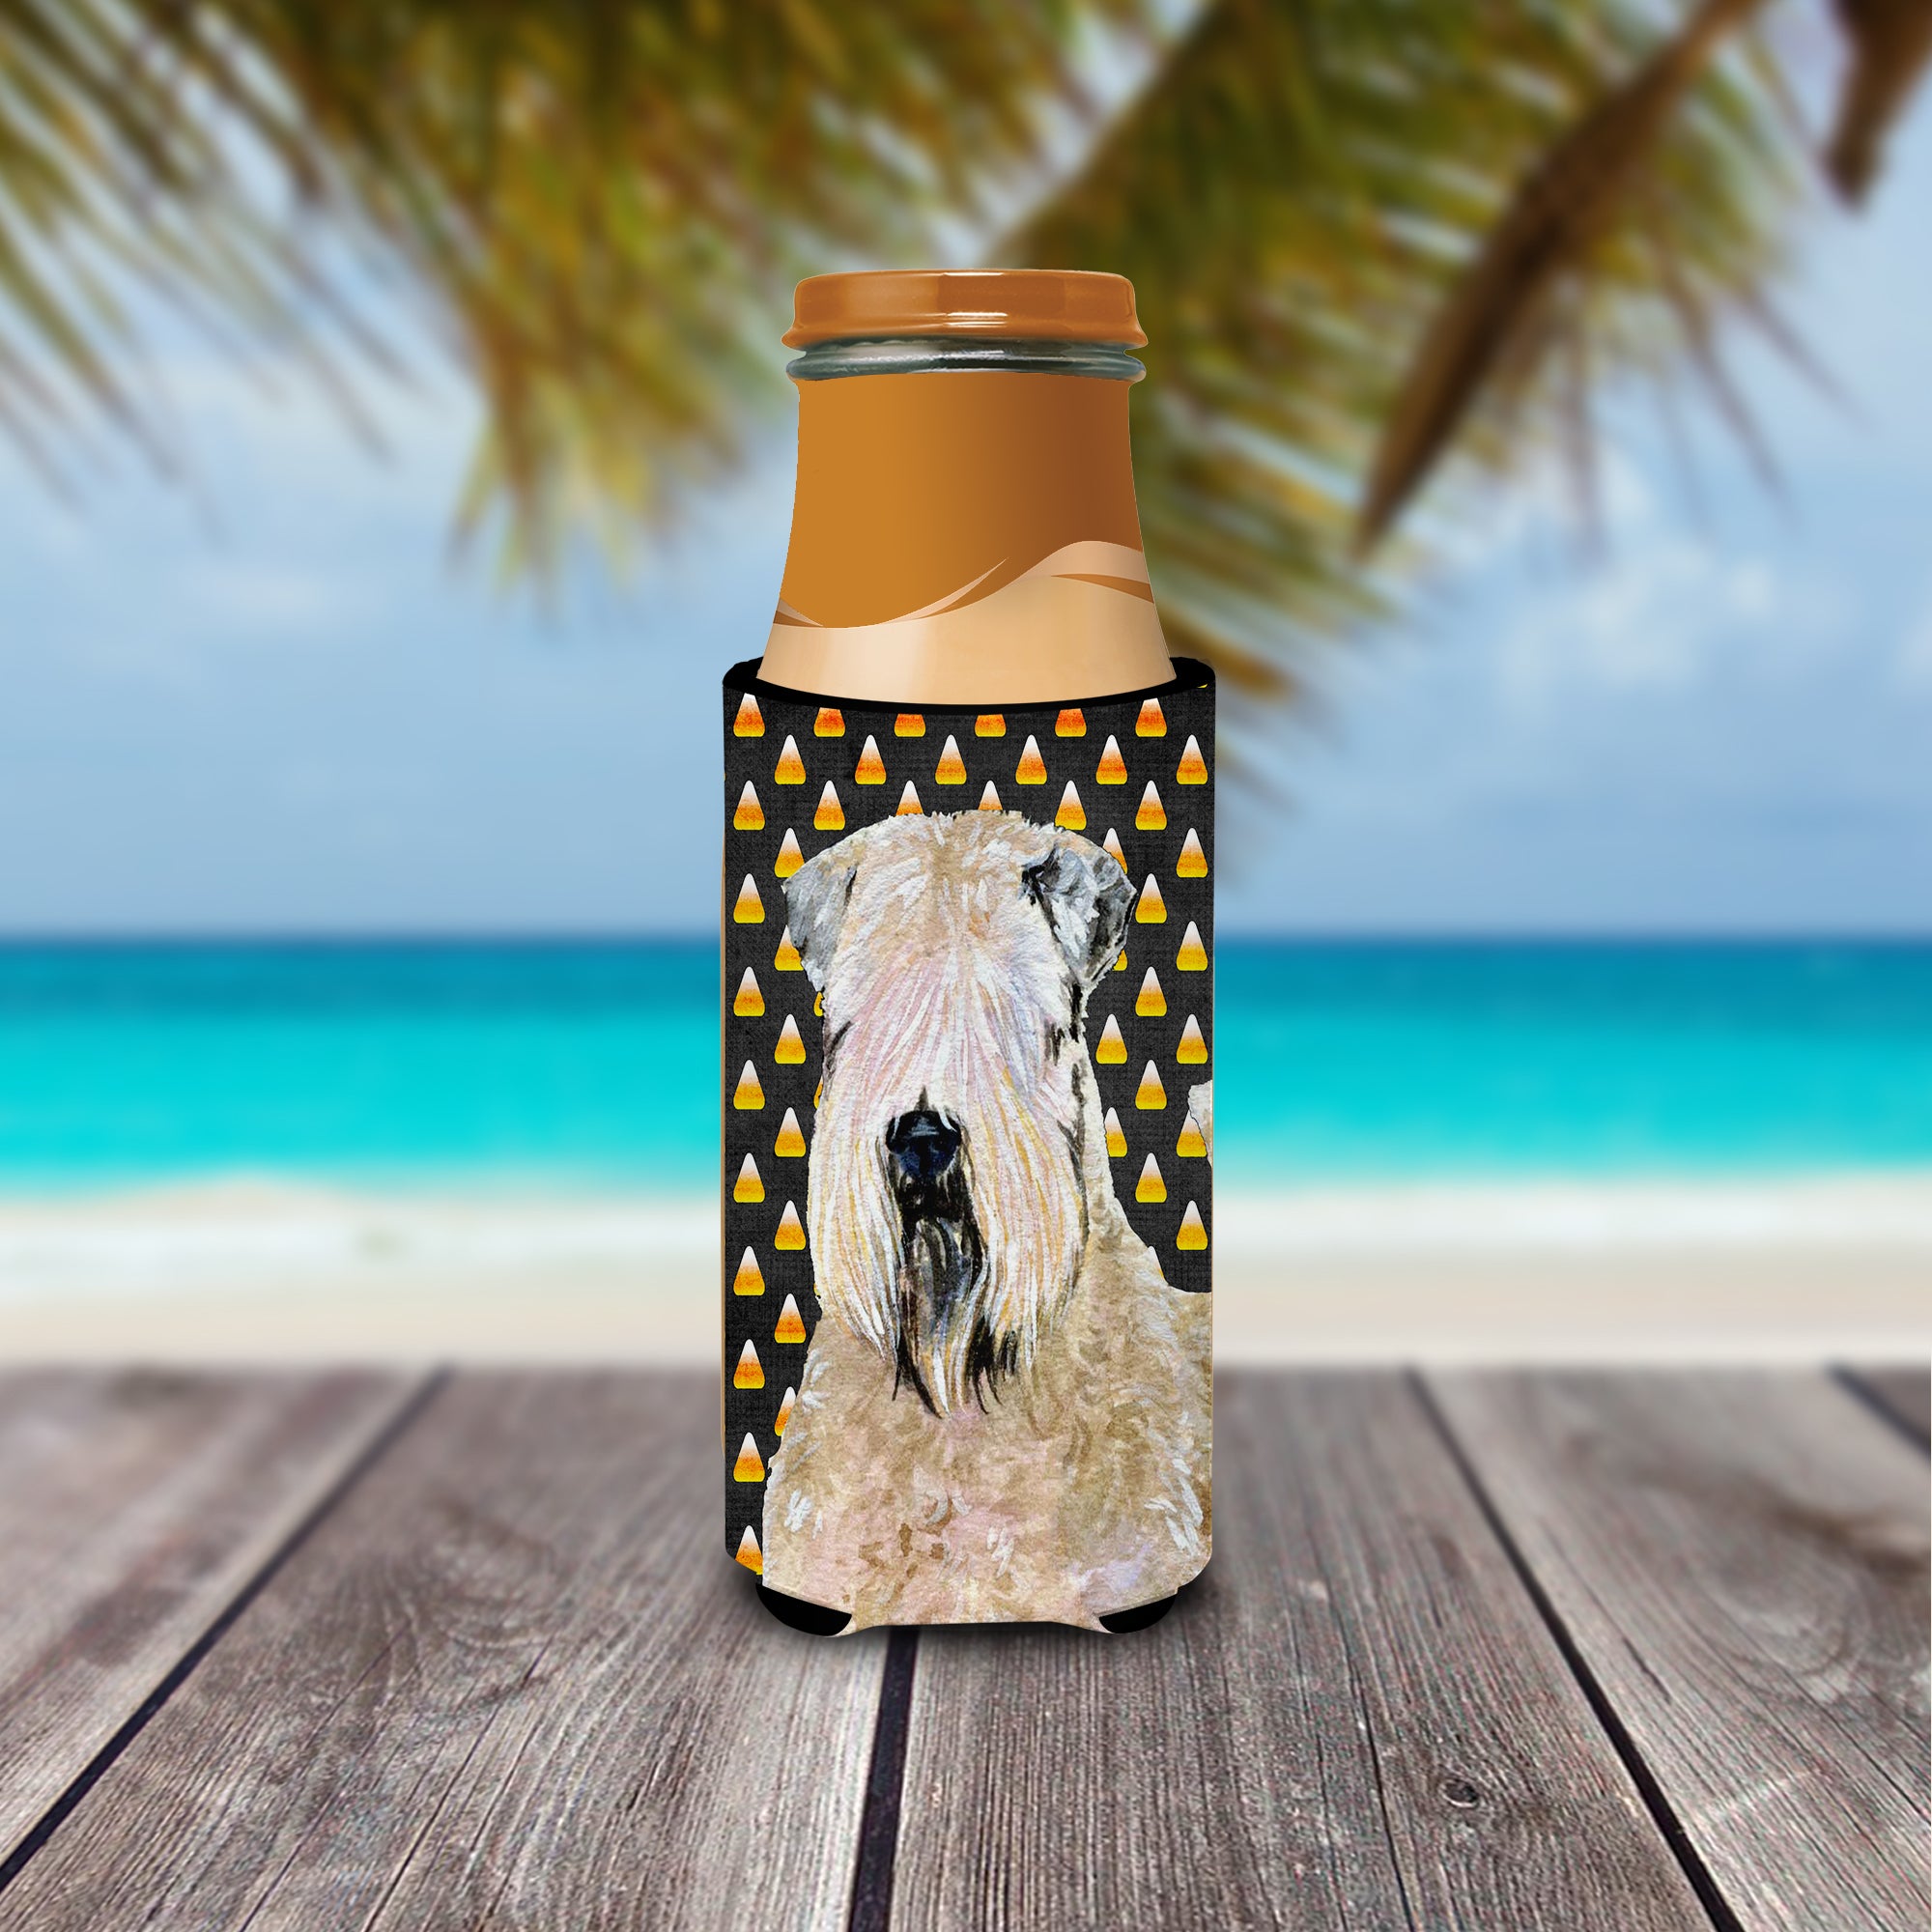 Wheaten Terrier Soft Coated Candy Corn Halloween Portrait Ultra Beverage Insulators for slim cans SS4281MUK